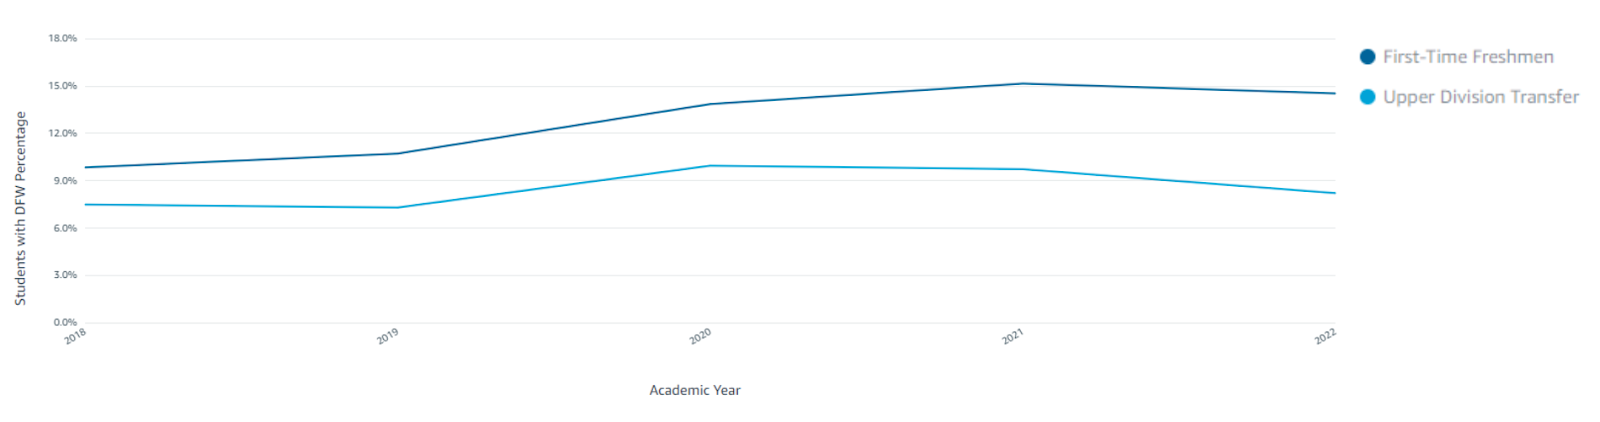 Admission Basis Group Undergraduate DFW Trend. See accessible data table below